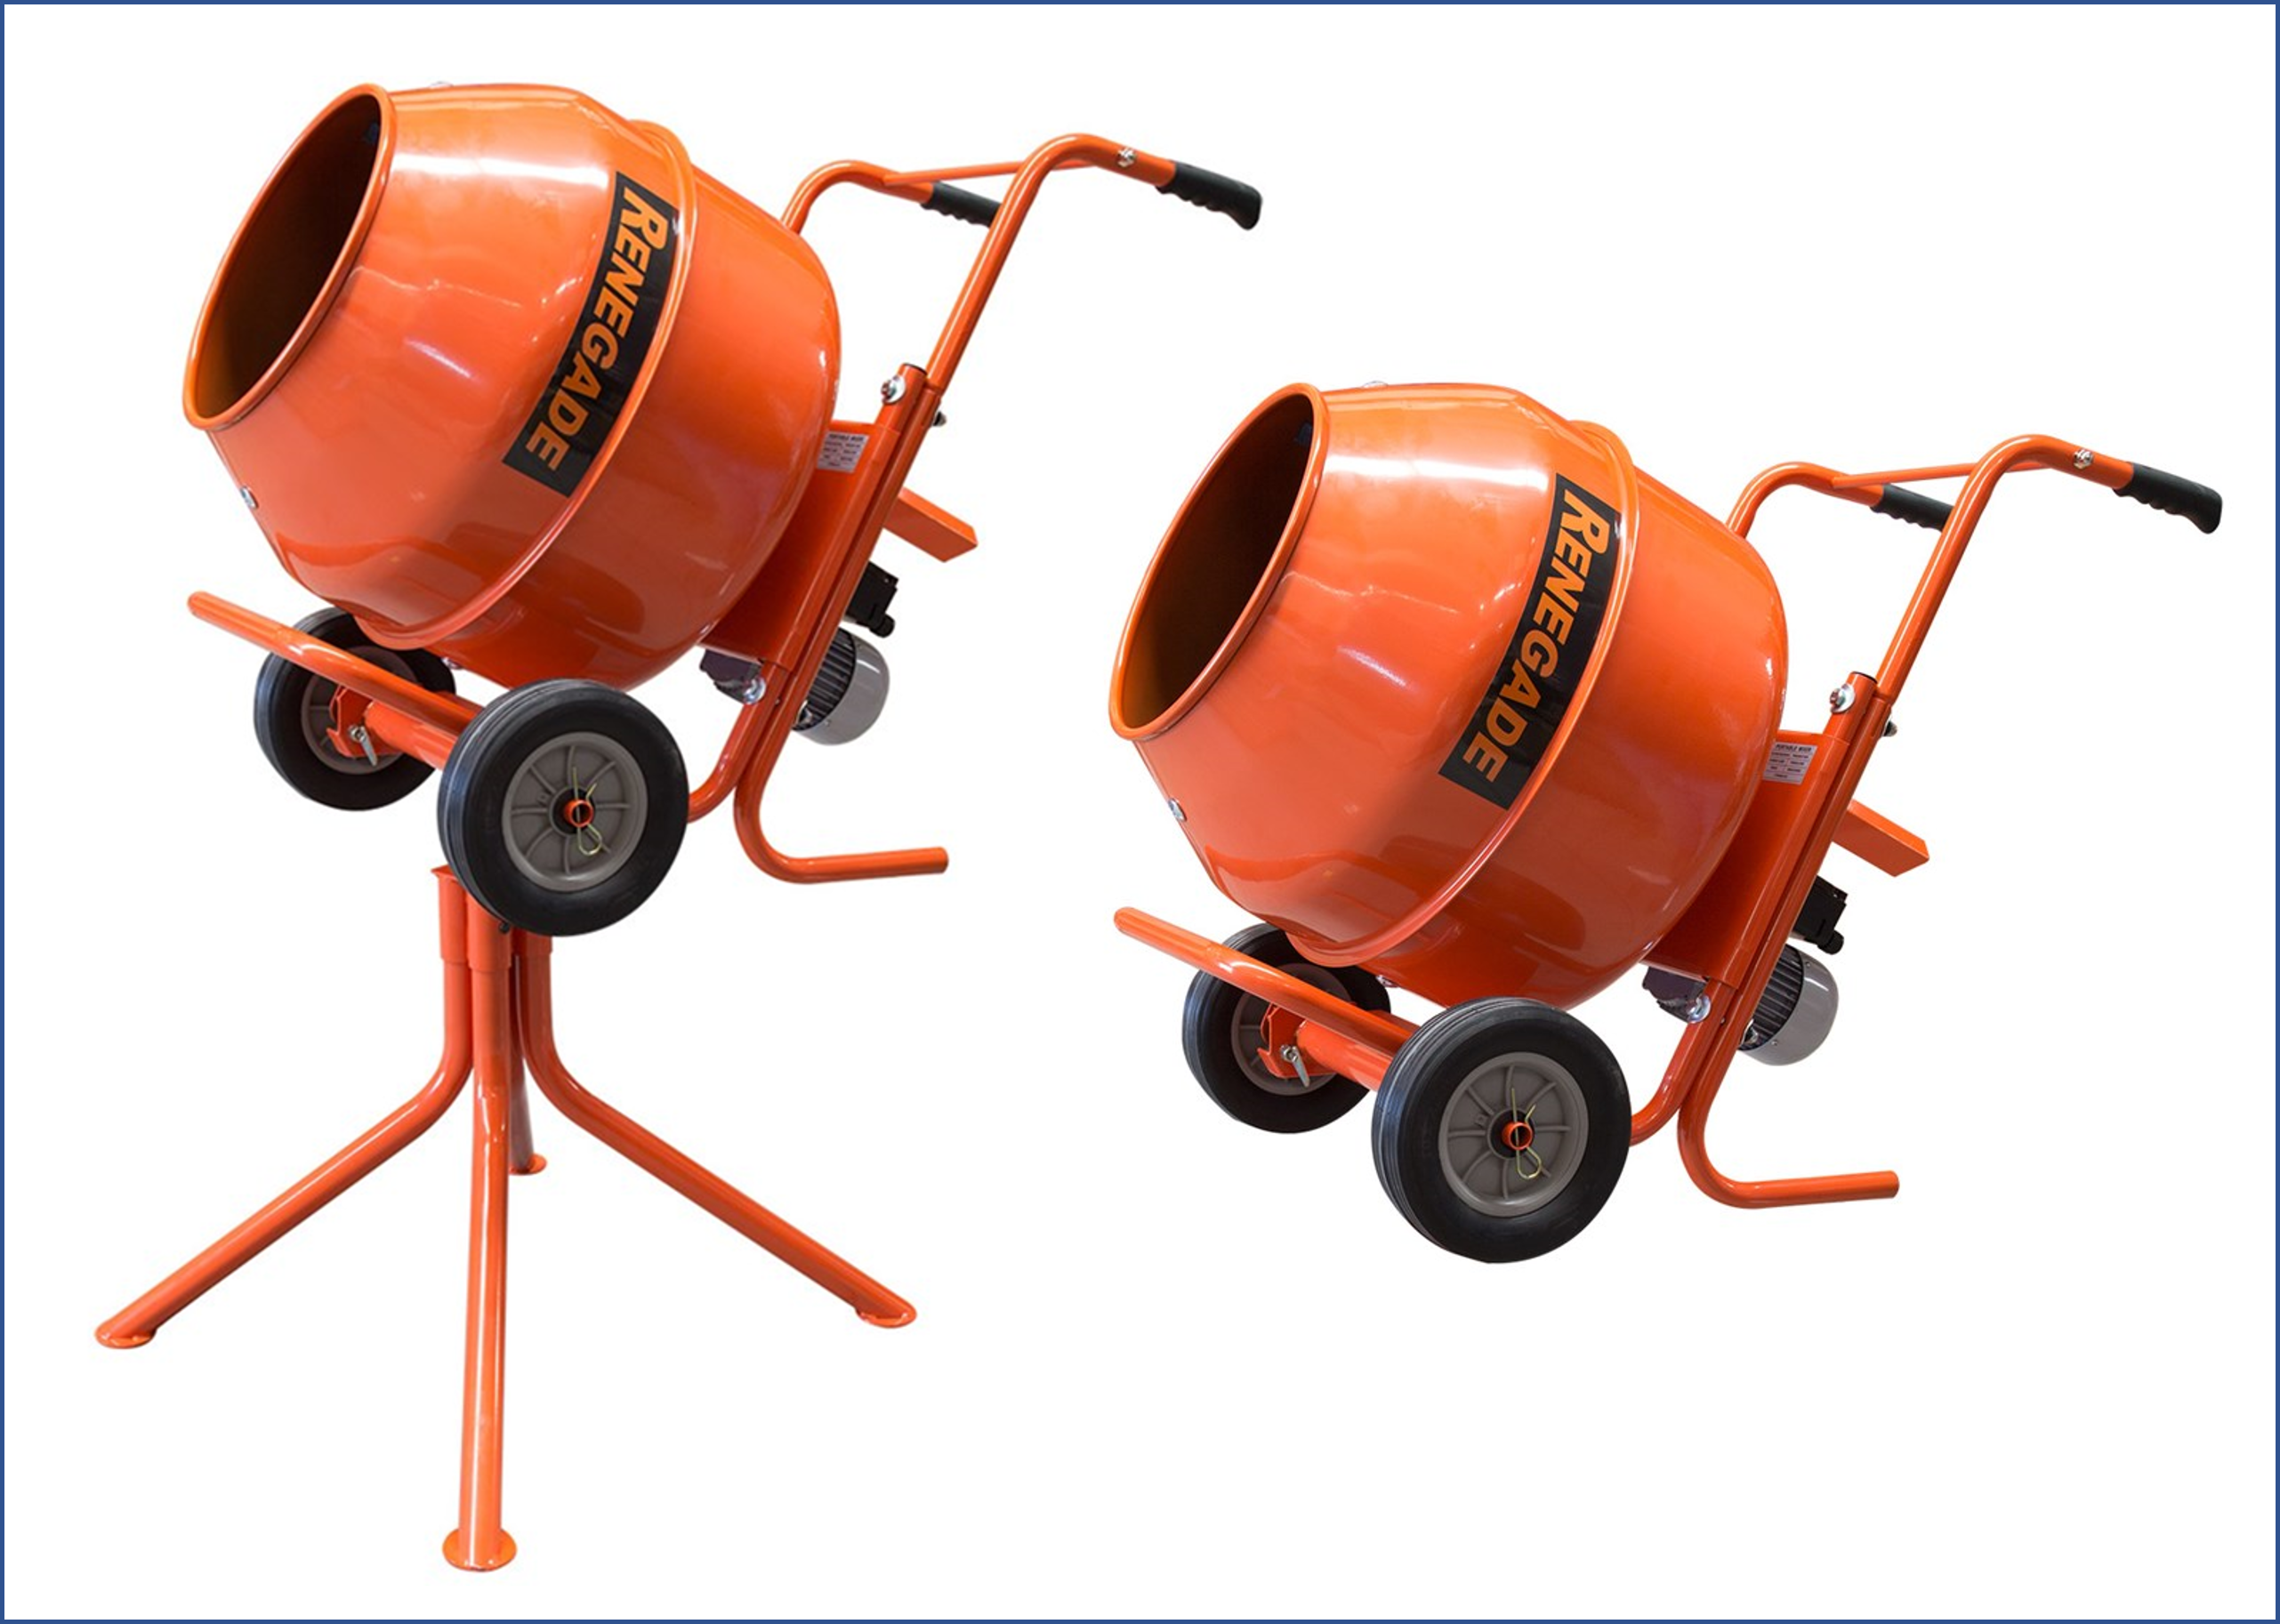 Cement Mixer - 2.2CuFt - Portable - Electric